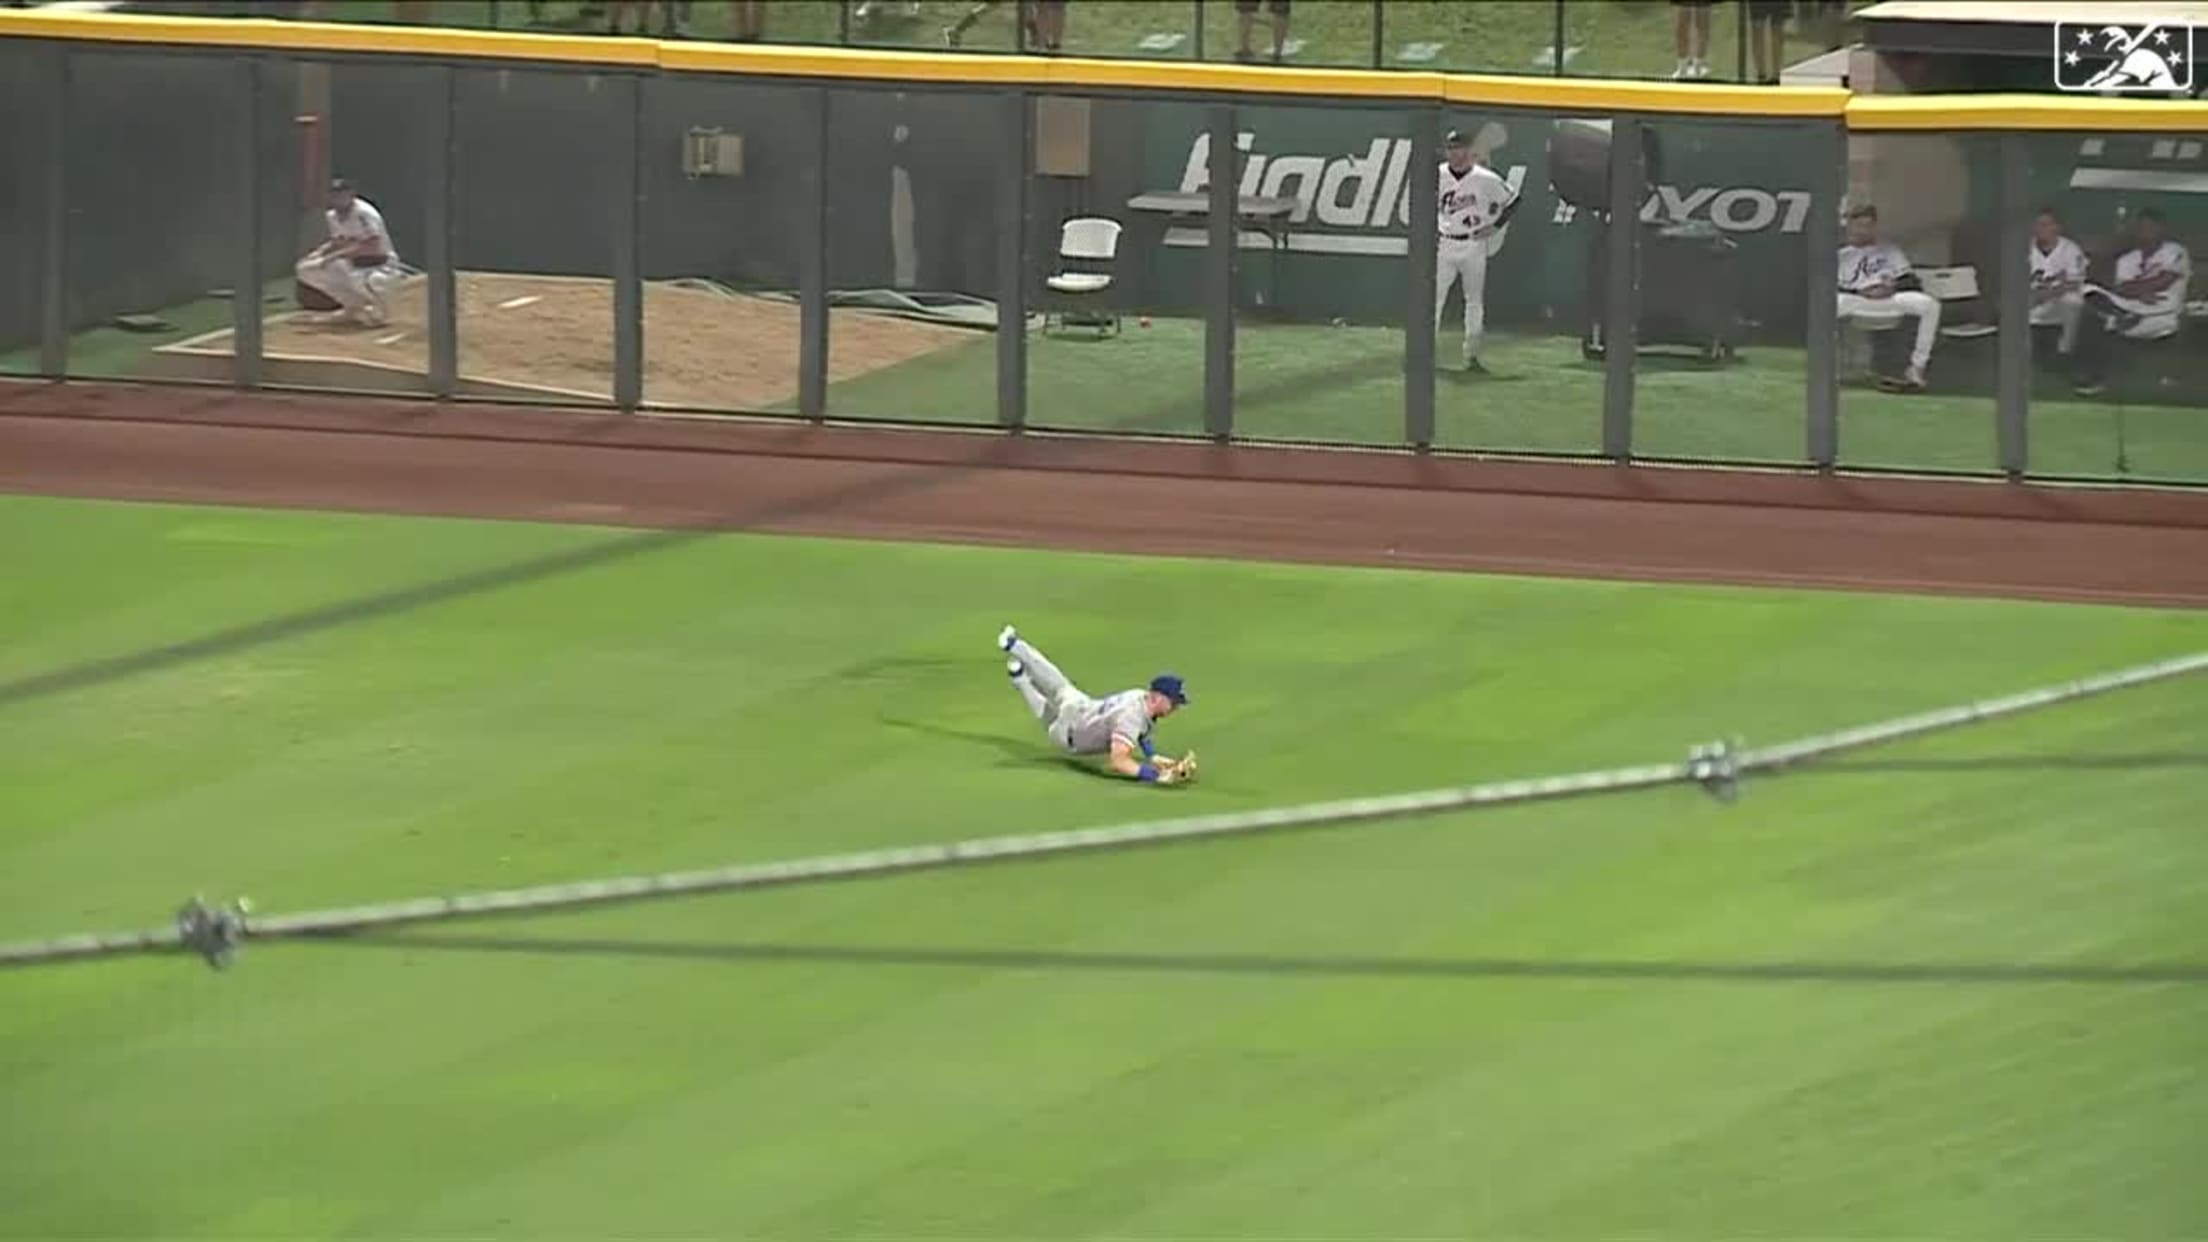 Grant Witherspoon's diving catch